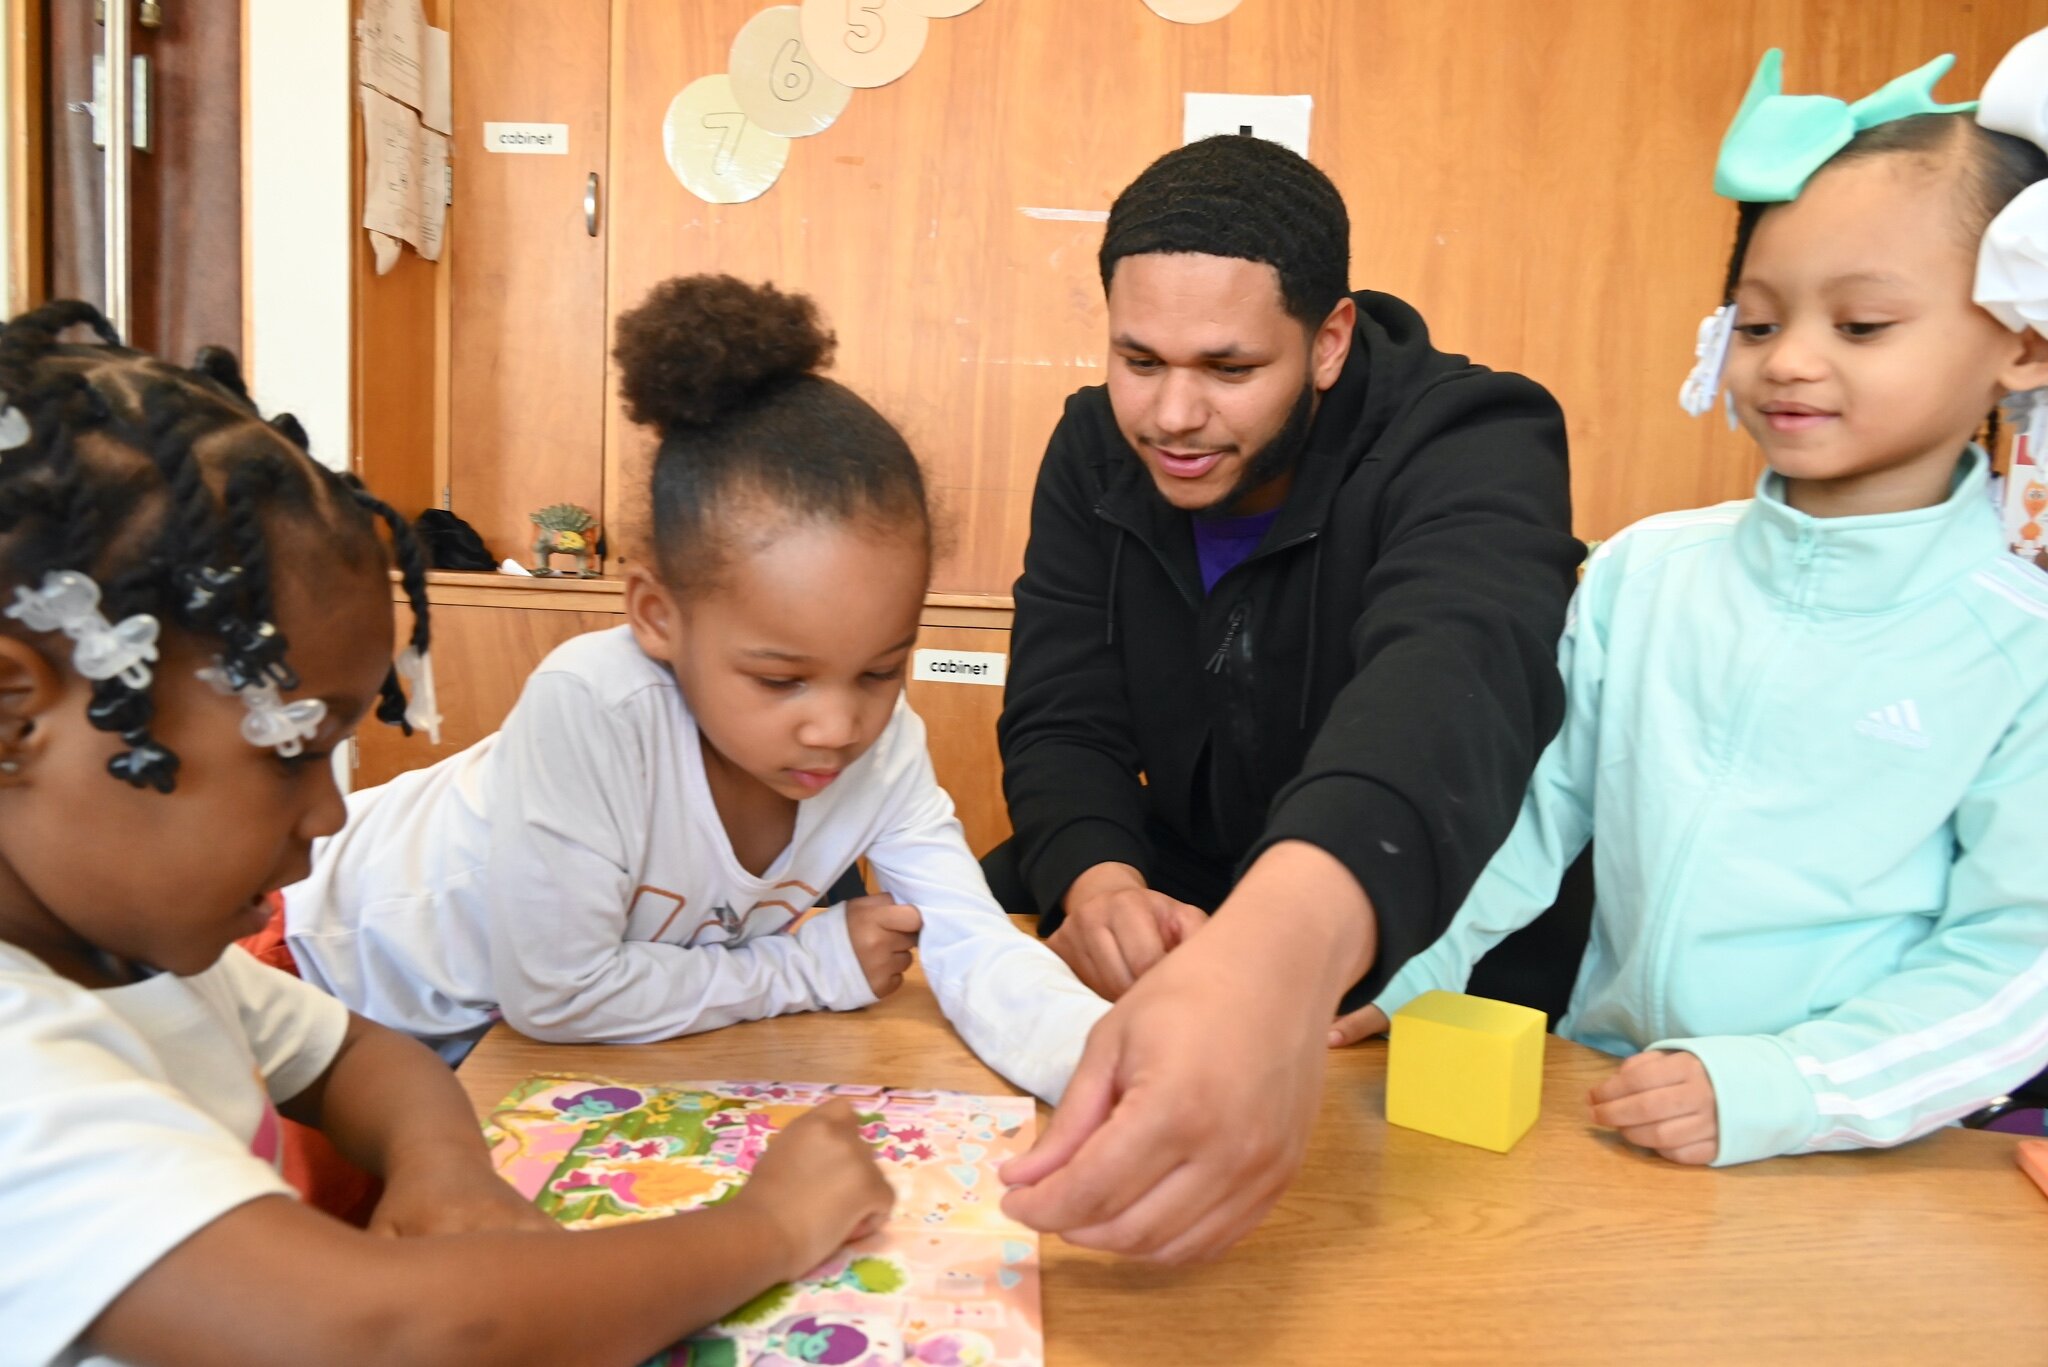 Terrell Jackson works with three young children at New Harvest Christian’s Learning Center.